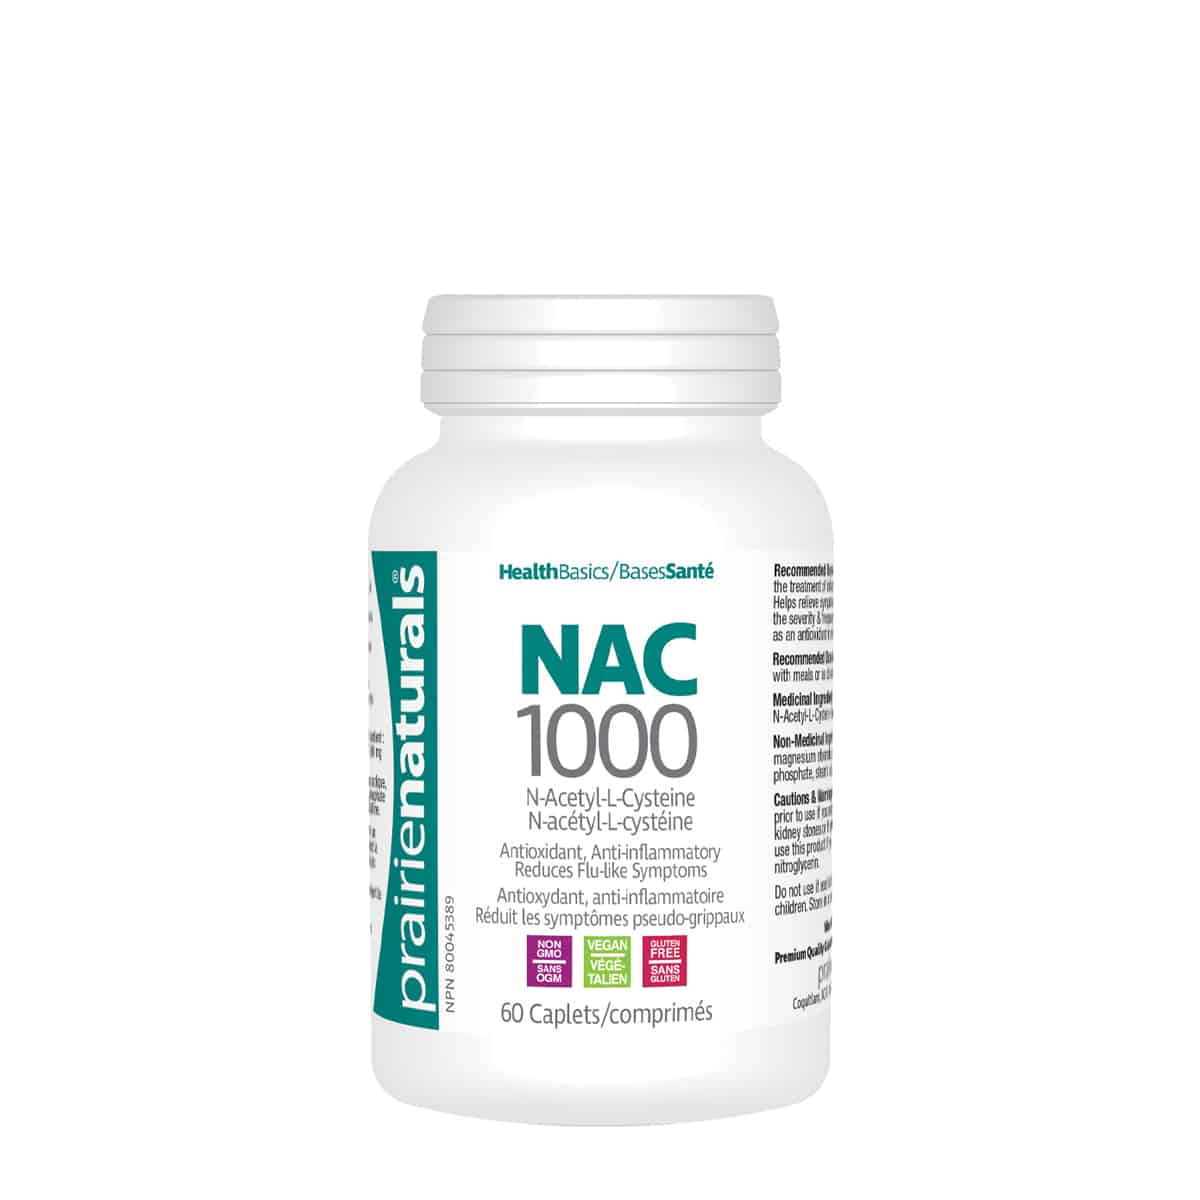 Featured image for “NAC 1000”